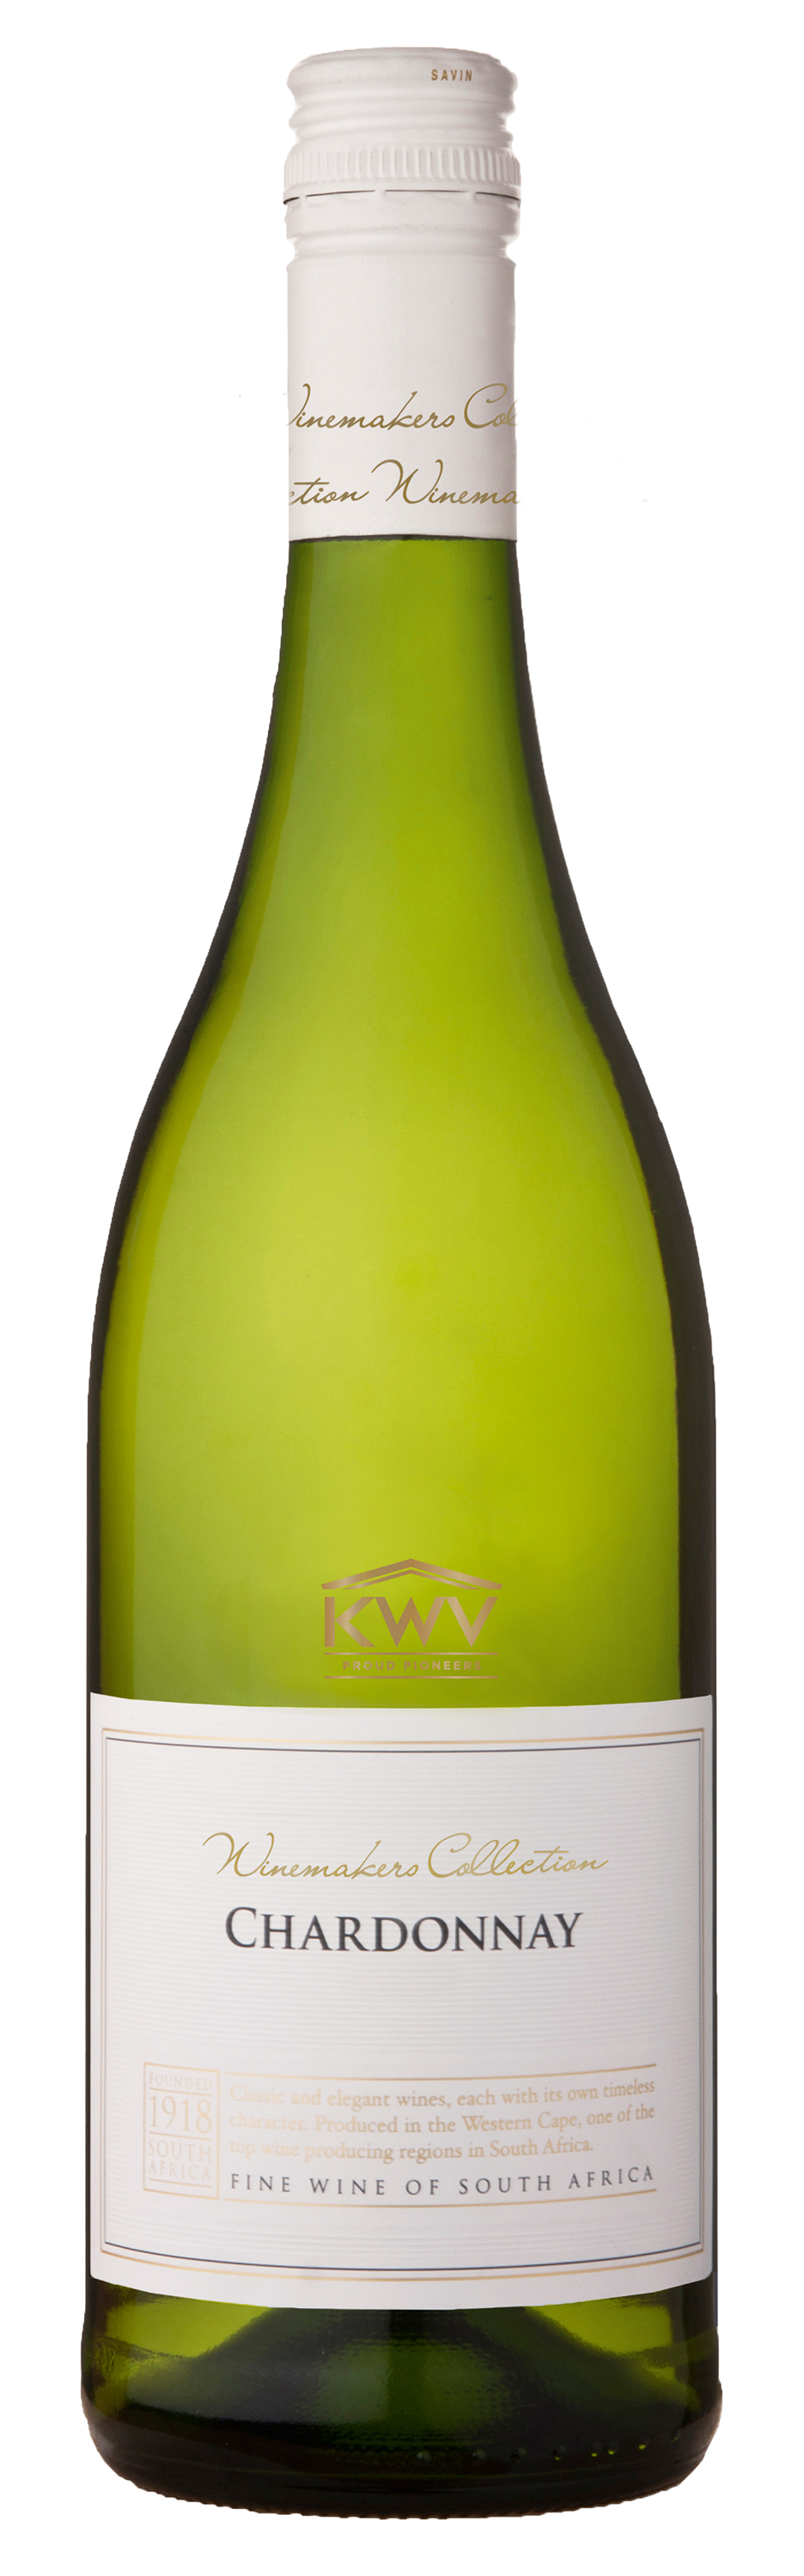 KWV Winemakers Collection Chardonnay